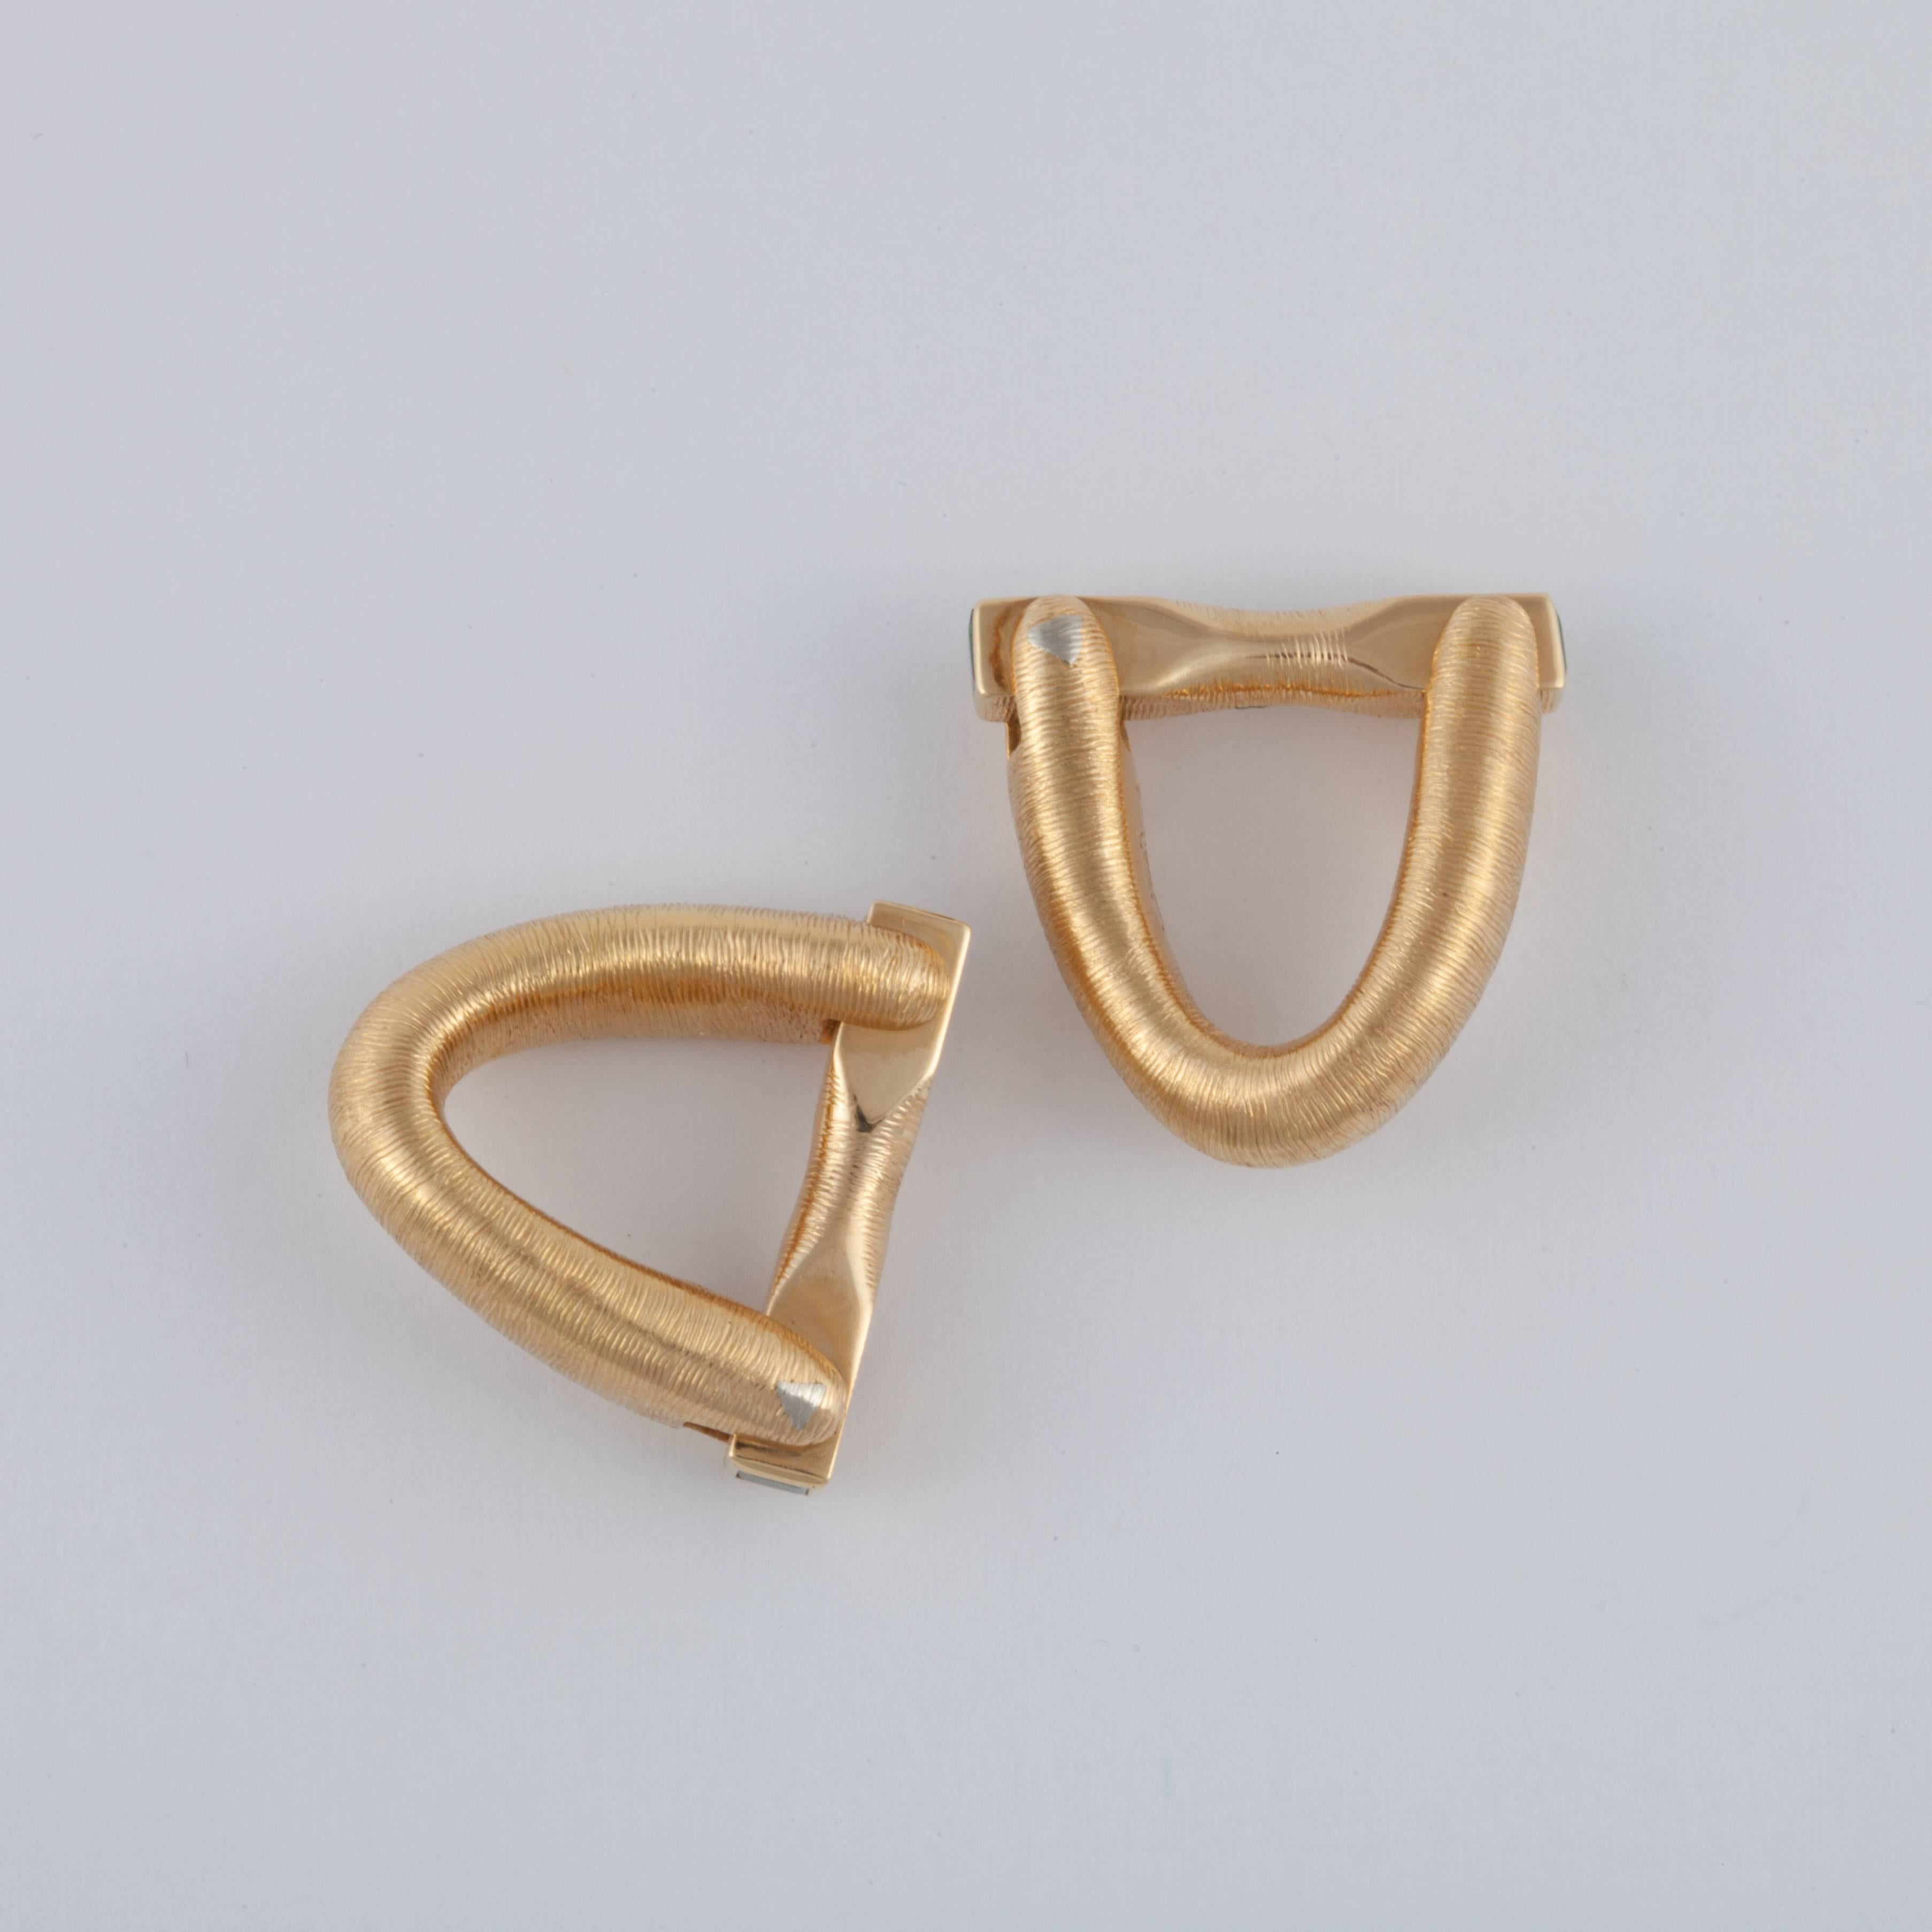 This pair of brushed gold cufflinks is marked 